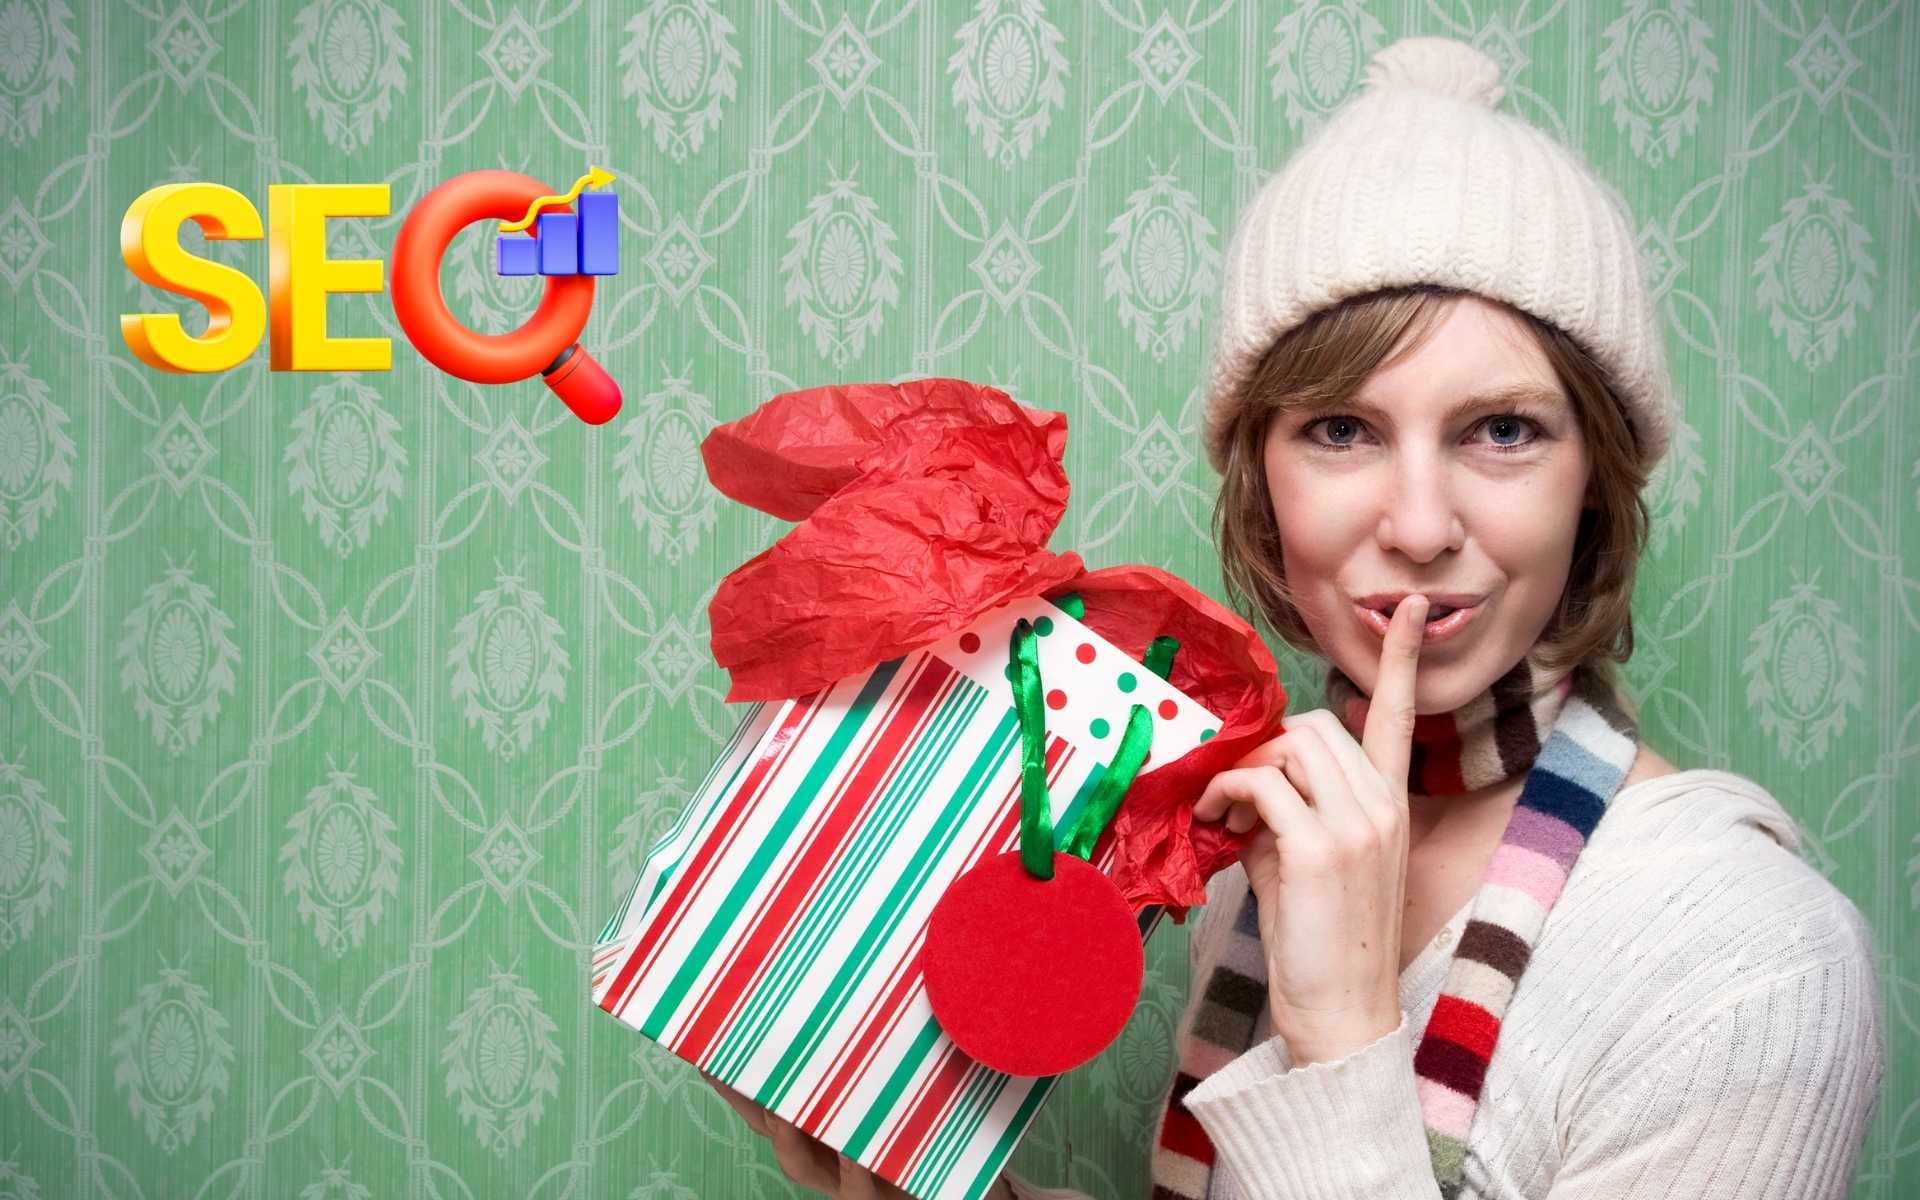 5 SEO best practices for Black Friday and the holiday season